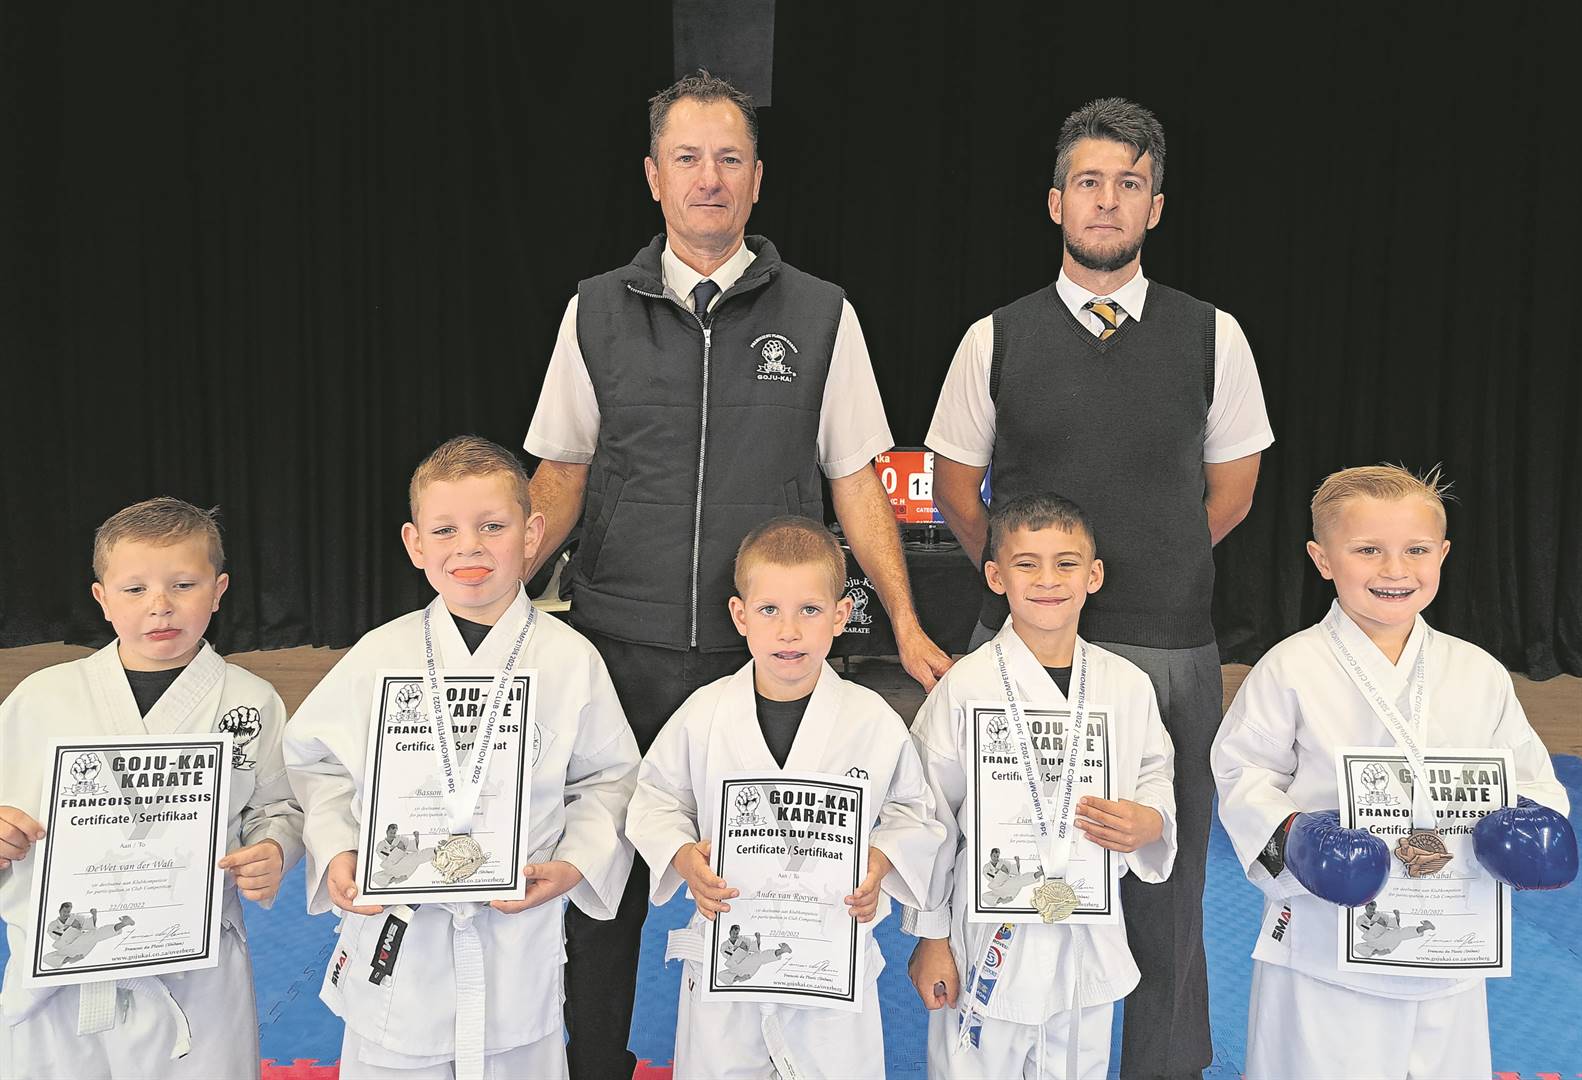 The Overberg Goju-Kai Karate Club celebrated a successful year as their karatekas are enjoying participating in competitions again. The third and final competition for the year was held last month (October), with more than 100 entries were received. This competition was also the start of the selection process for Goju-Kai National Championships for next year. Locals who competed (behind, from left) are Shihan Francois du Plessis and Sensei Louis Schultz with (front) DeWet van der Walt, Basson Hougaard, Andre van Rooyen, Liam Opperman (Stellenbosch) and Kiaan Nabal (Durbanville). 